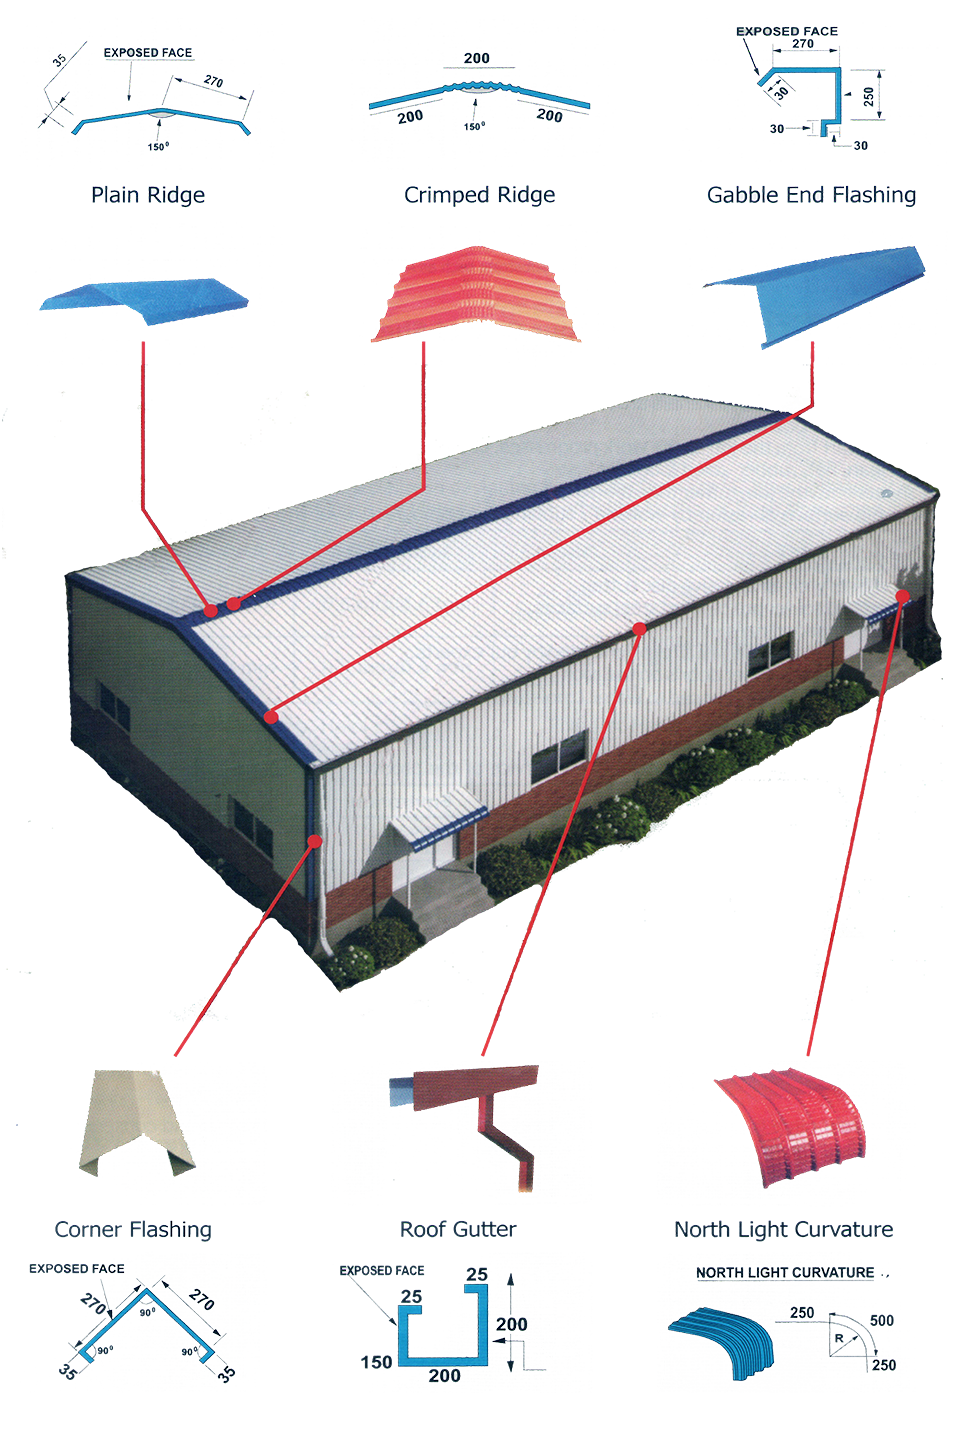 Roofing accessories